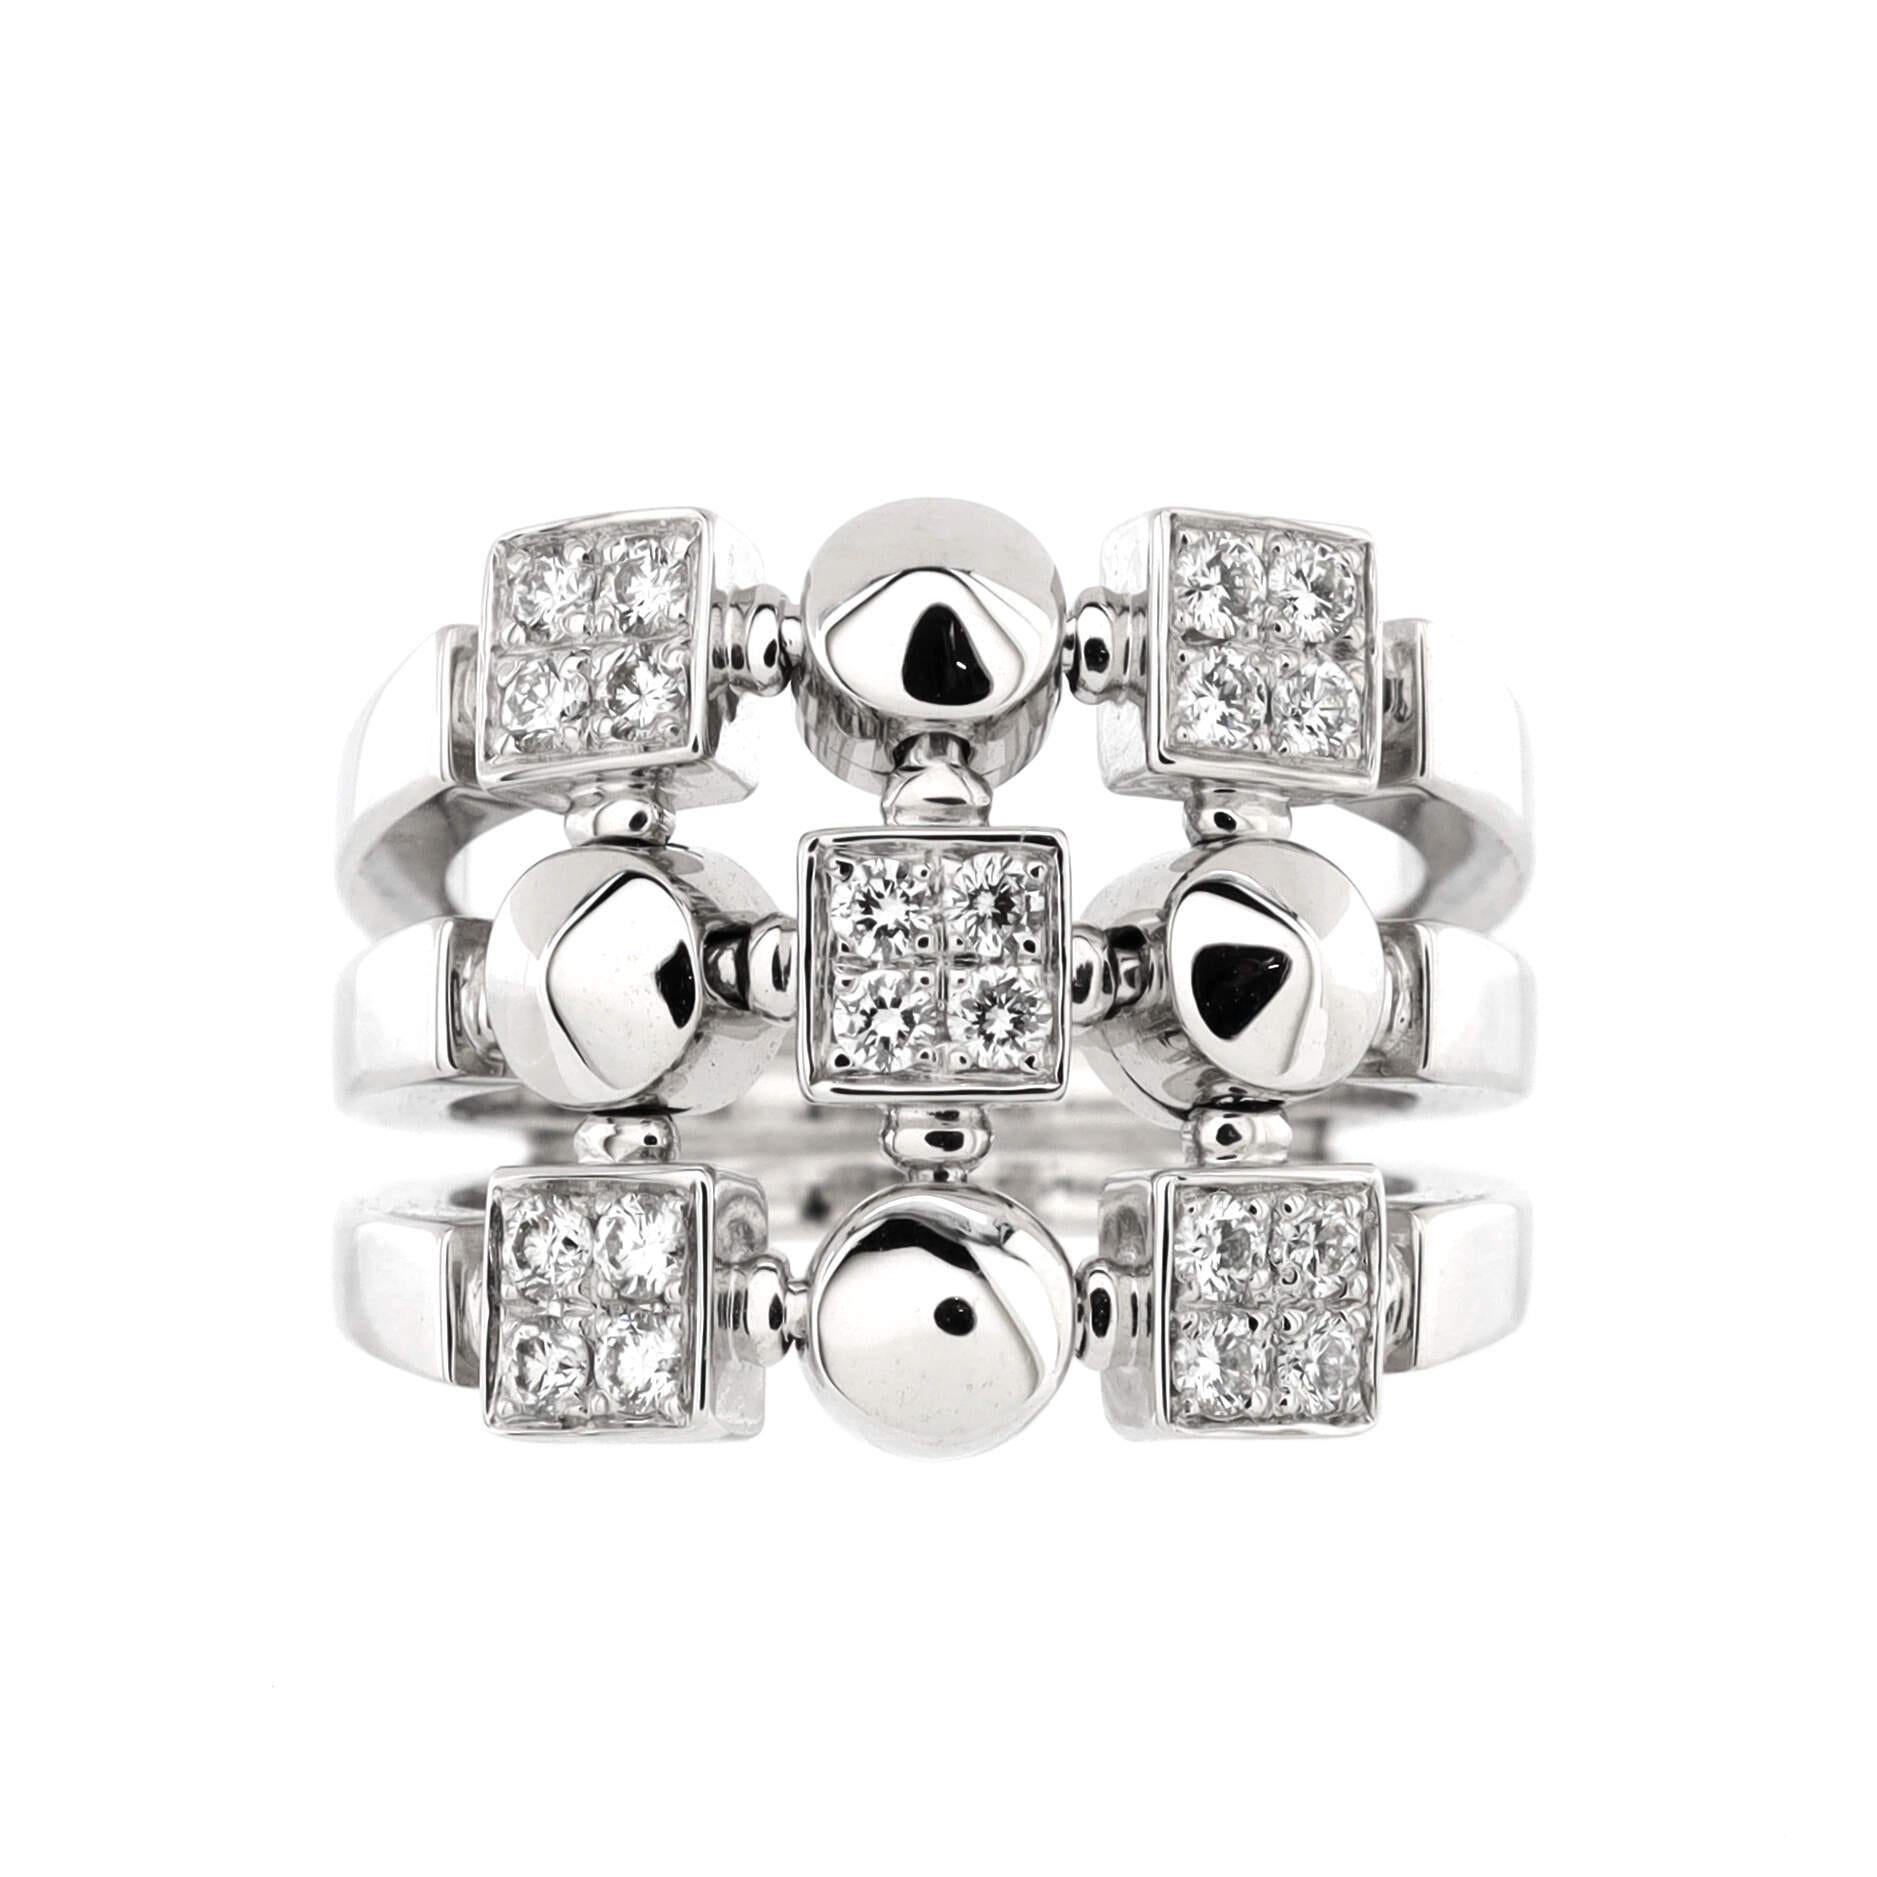 Condition: Great. Minor wear throughout.
Accessories: No Accessories
Measurements: Size: 6, Width: 5.40 mm
Designer: Bvlgari
Model: Three Row Lucea Ring 18K White Gold with Diamonds
Exterior Color: White Gold
Item Number: 221769/440